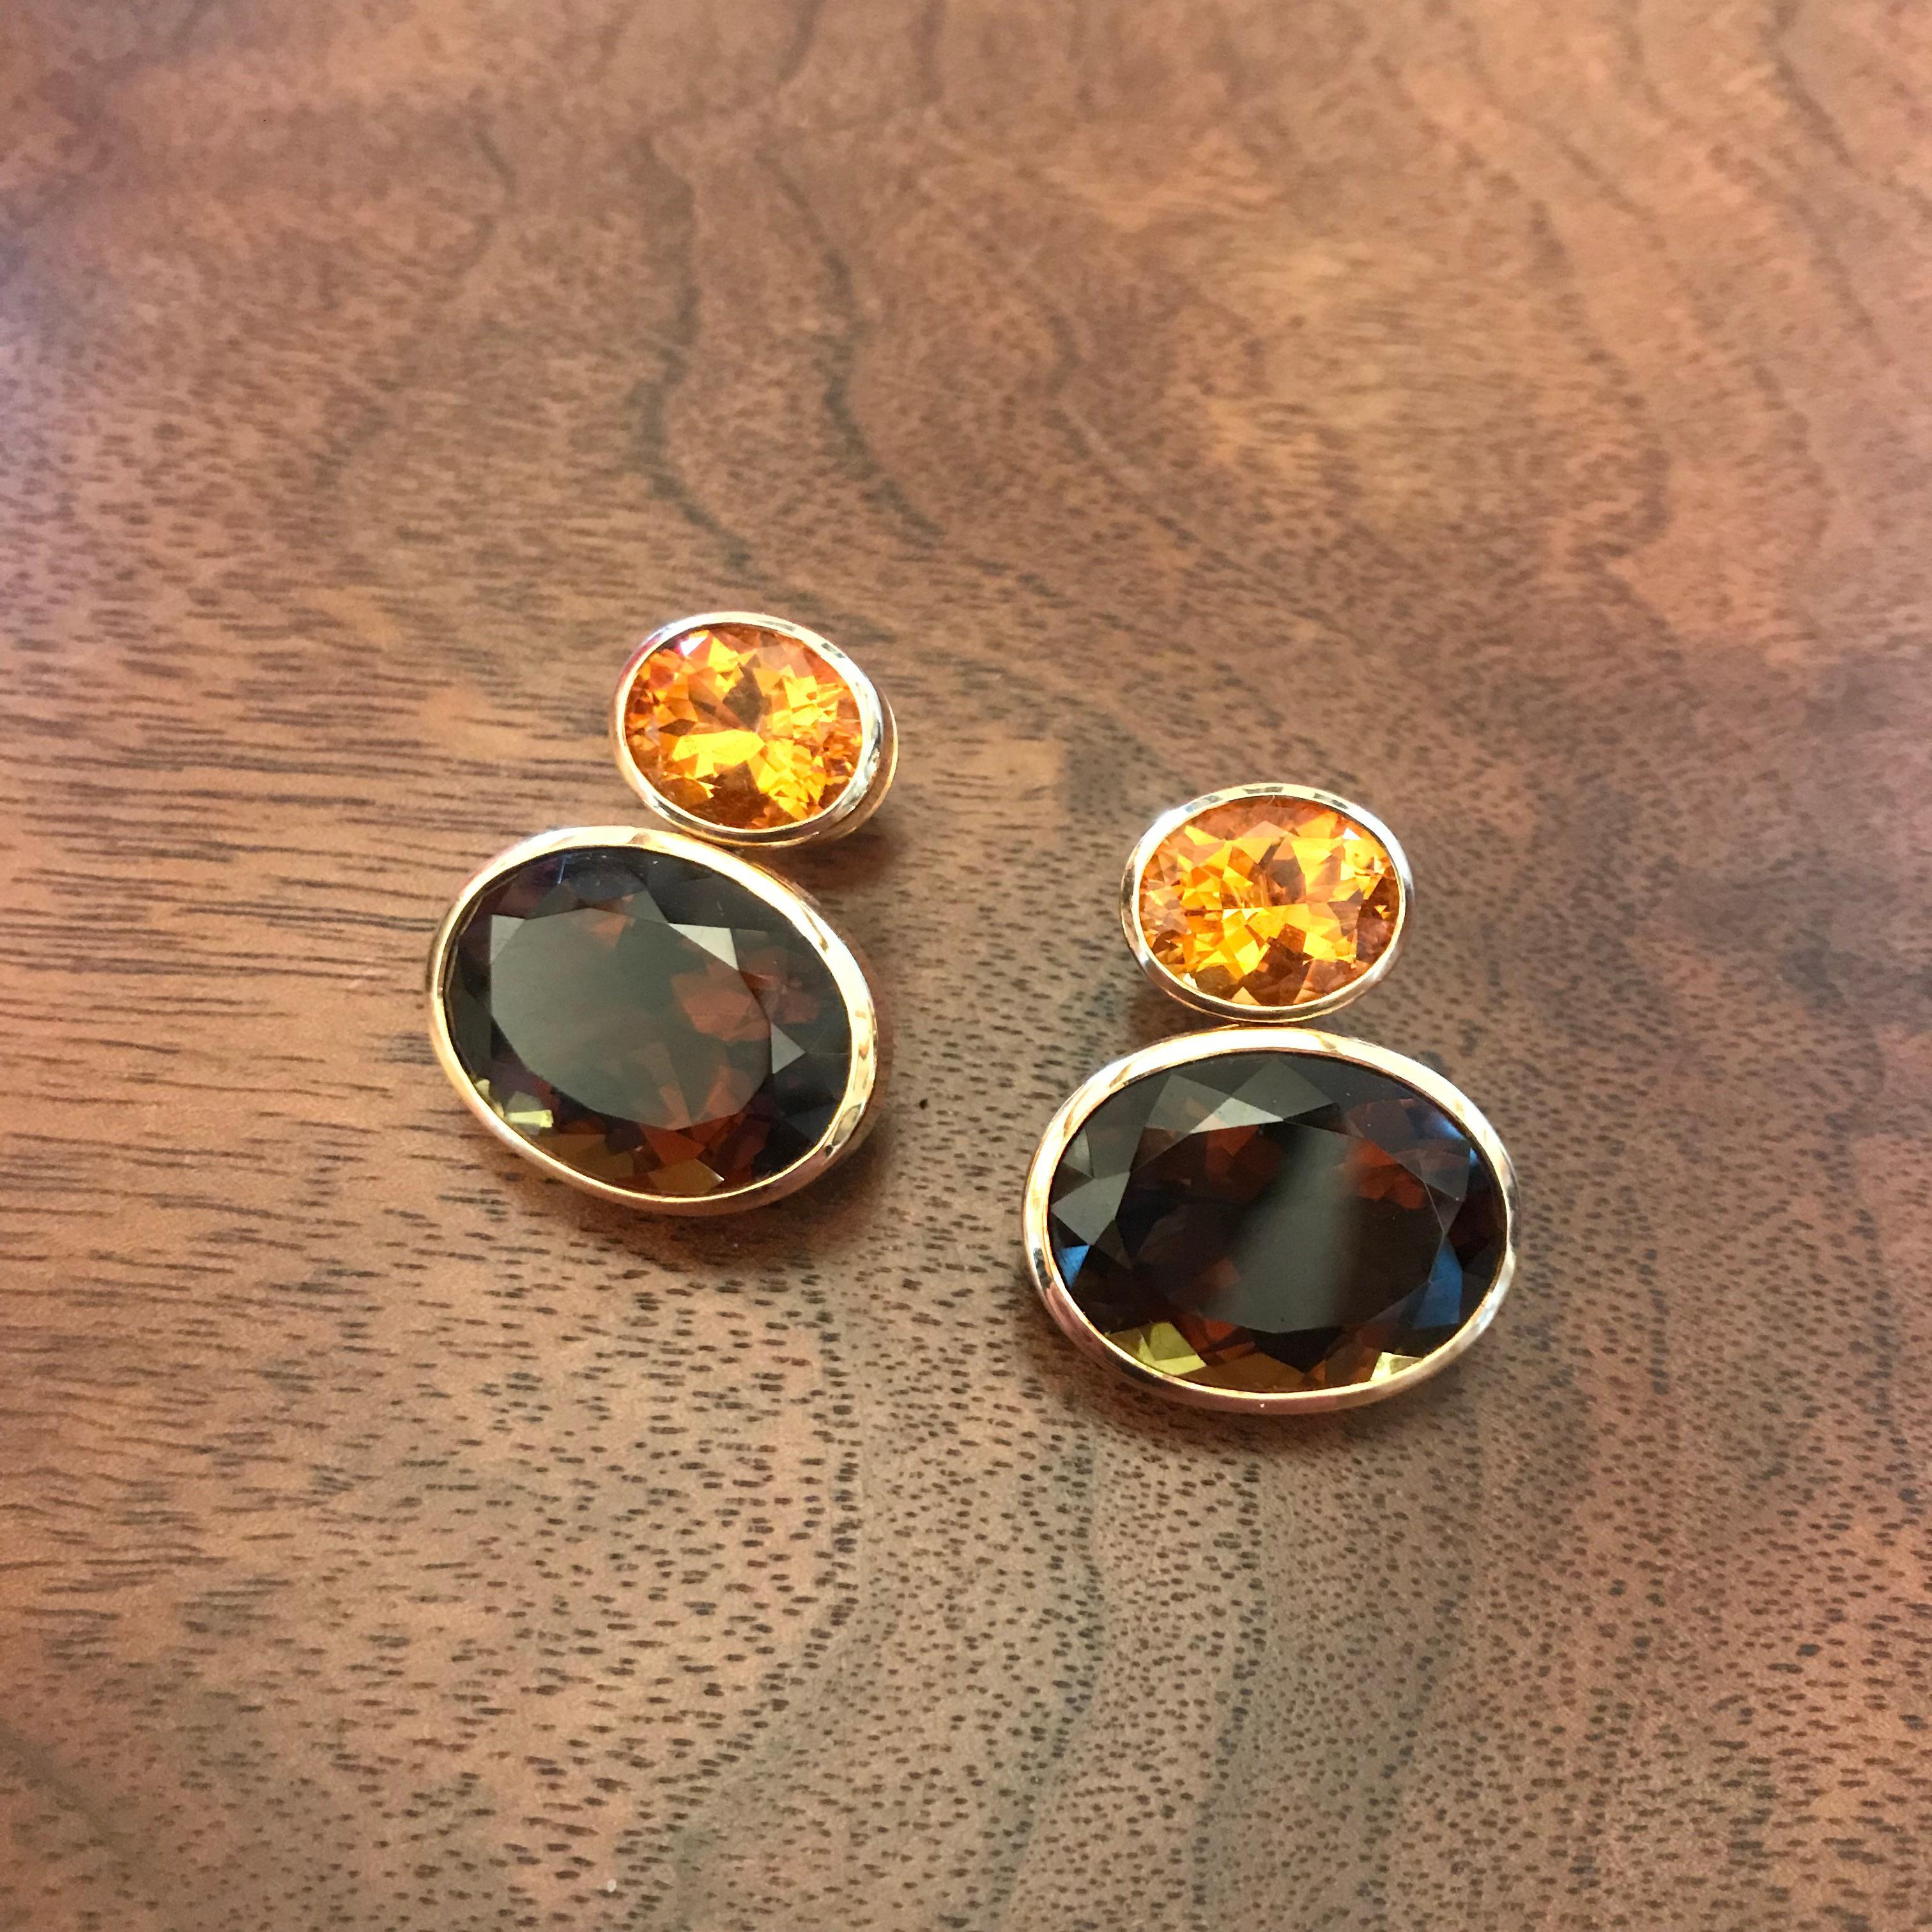 Colleen B. Rosenblat designed this classic pair of smokey quartz and citrin earrings set in 18 carat rose gold.